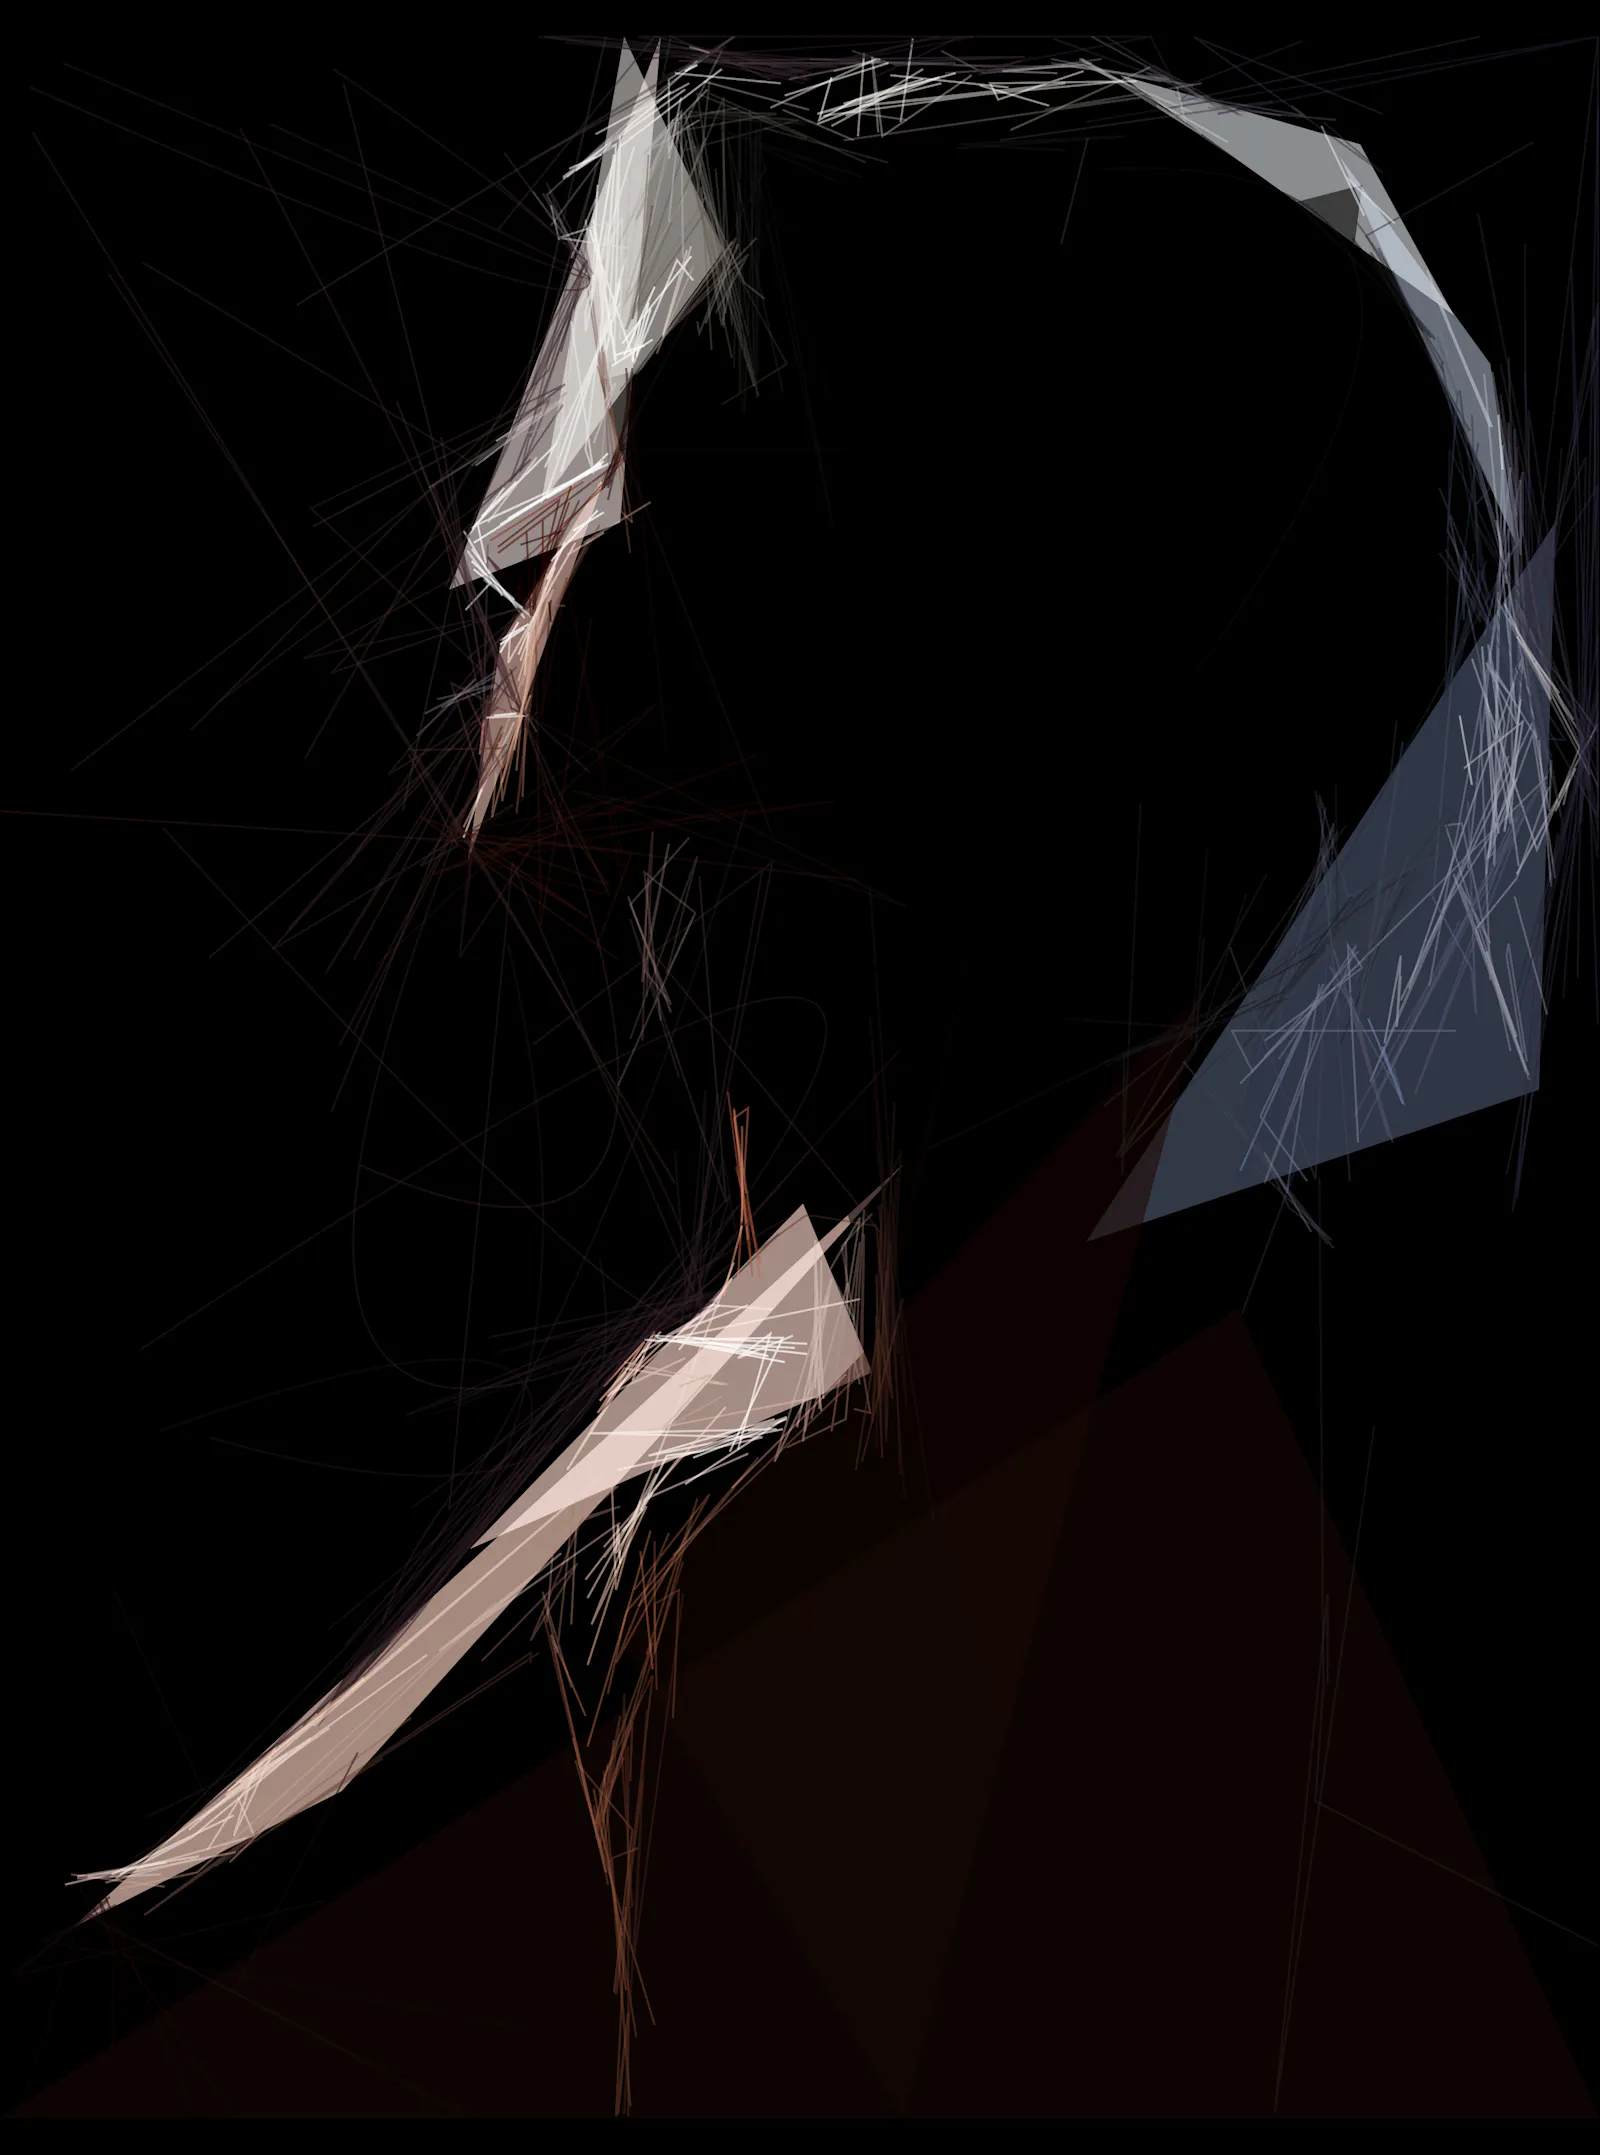 Triangles and lines come together to form a portrait of a woman gazing at the stars.